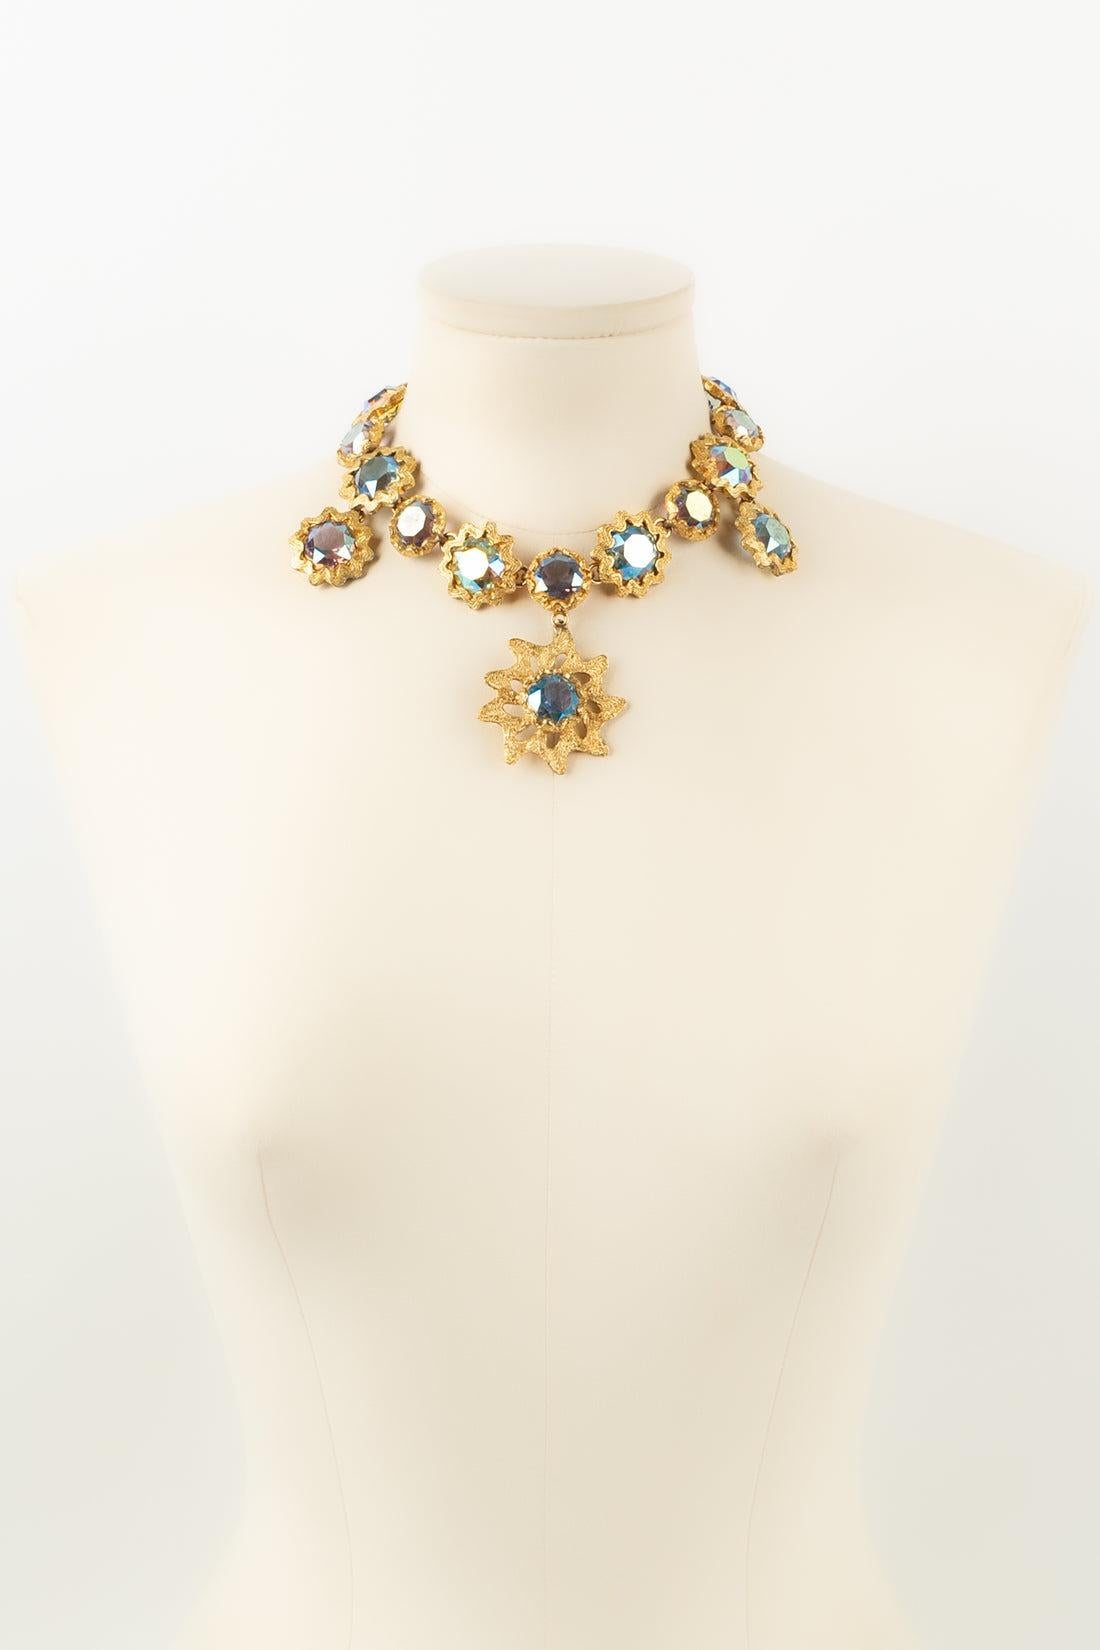 Yves Saint Laurent Short Necklace In Gold-Plated Metal and Rhinestones For Sale 5